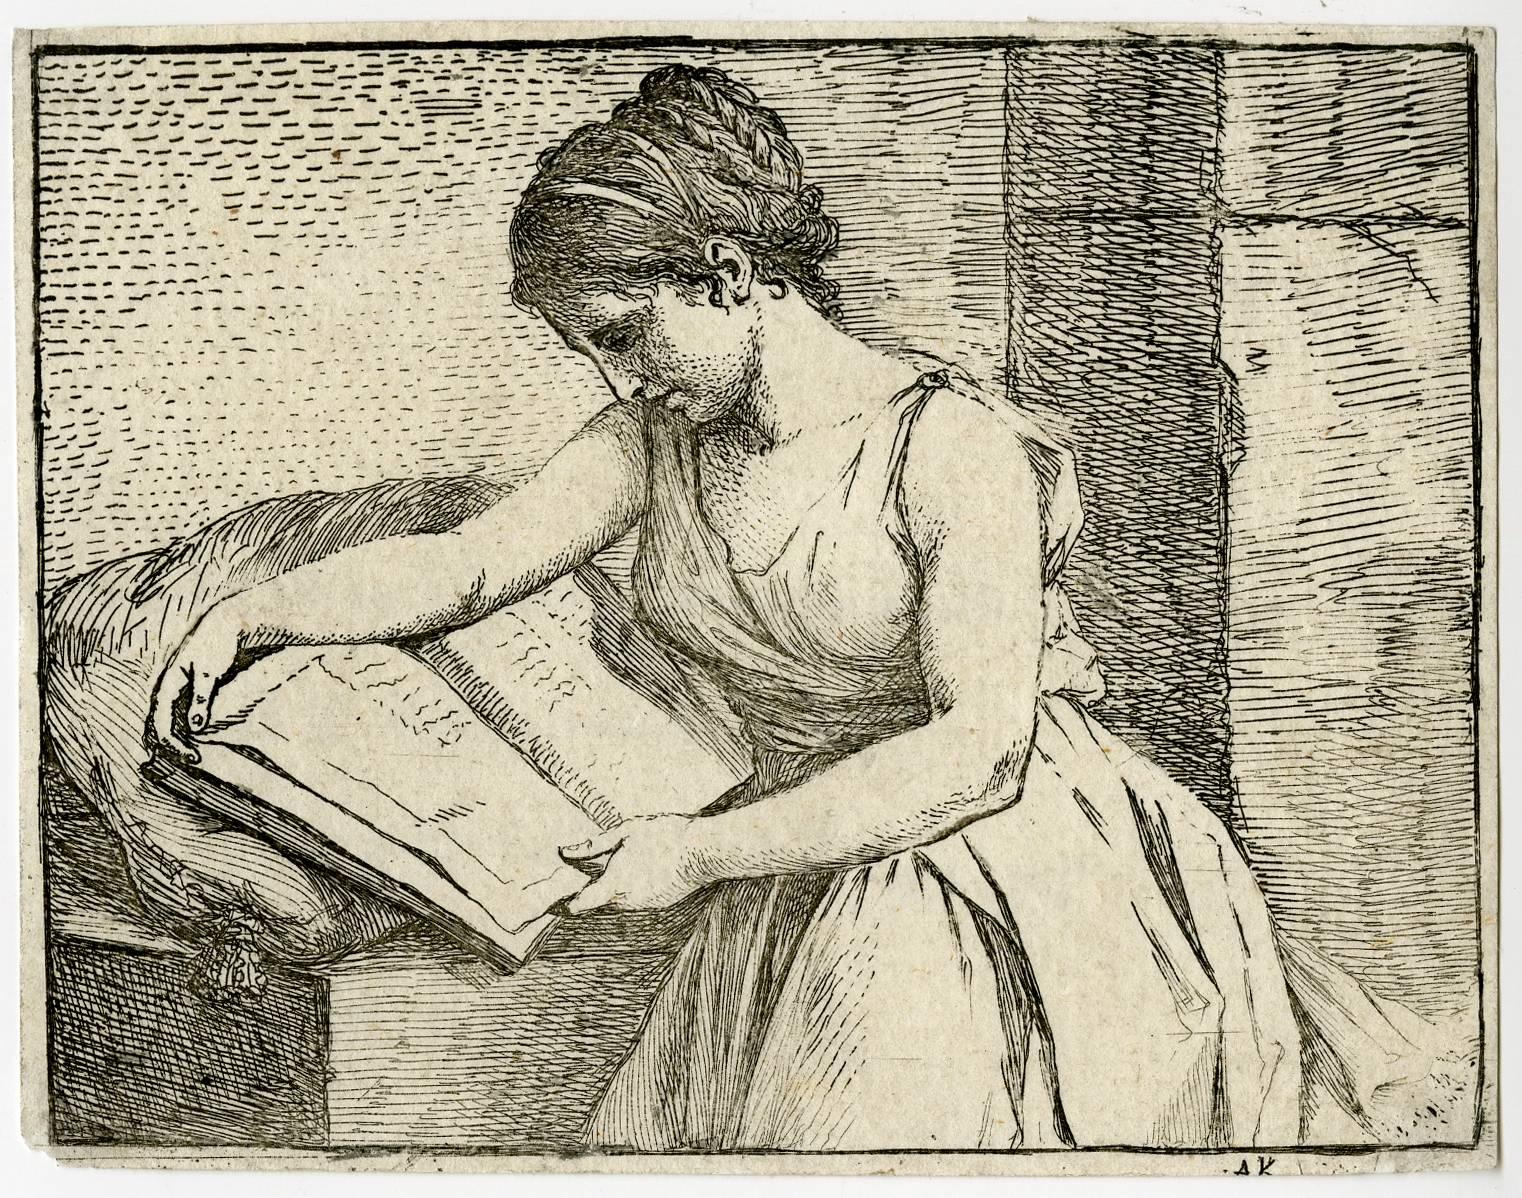 Angelica Kauffmann Figurative Print - Untitled - A woman reading a book.